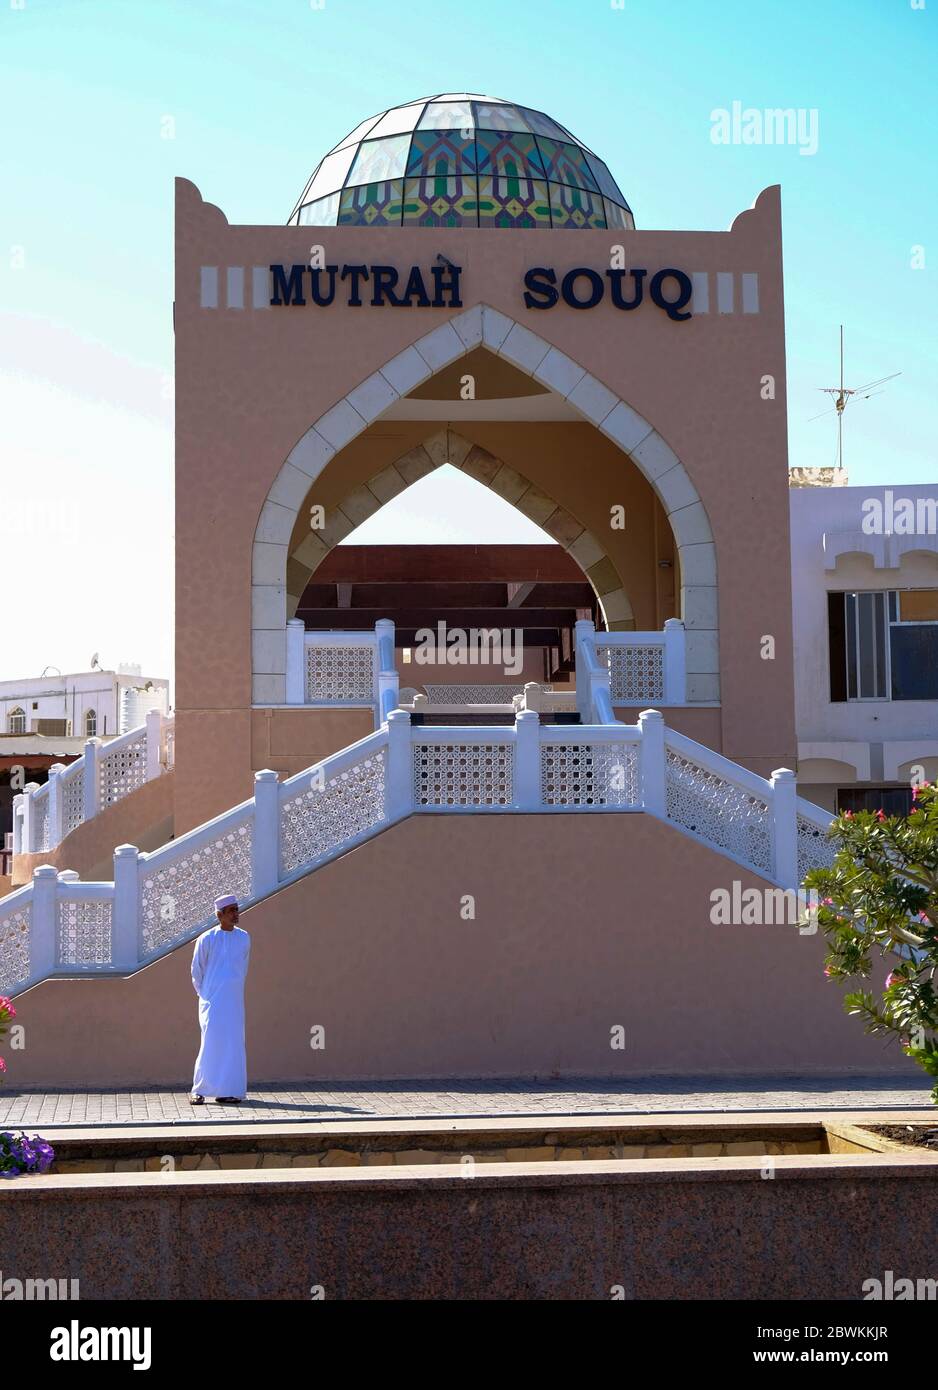 Local Omani man waiting outside Corniche entrance of the Mutrah Souq in Muscat, Sultanate of Oman Stock Photo